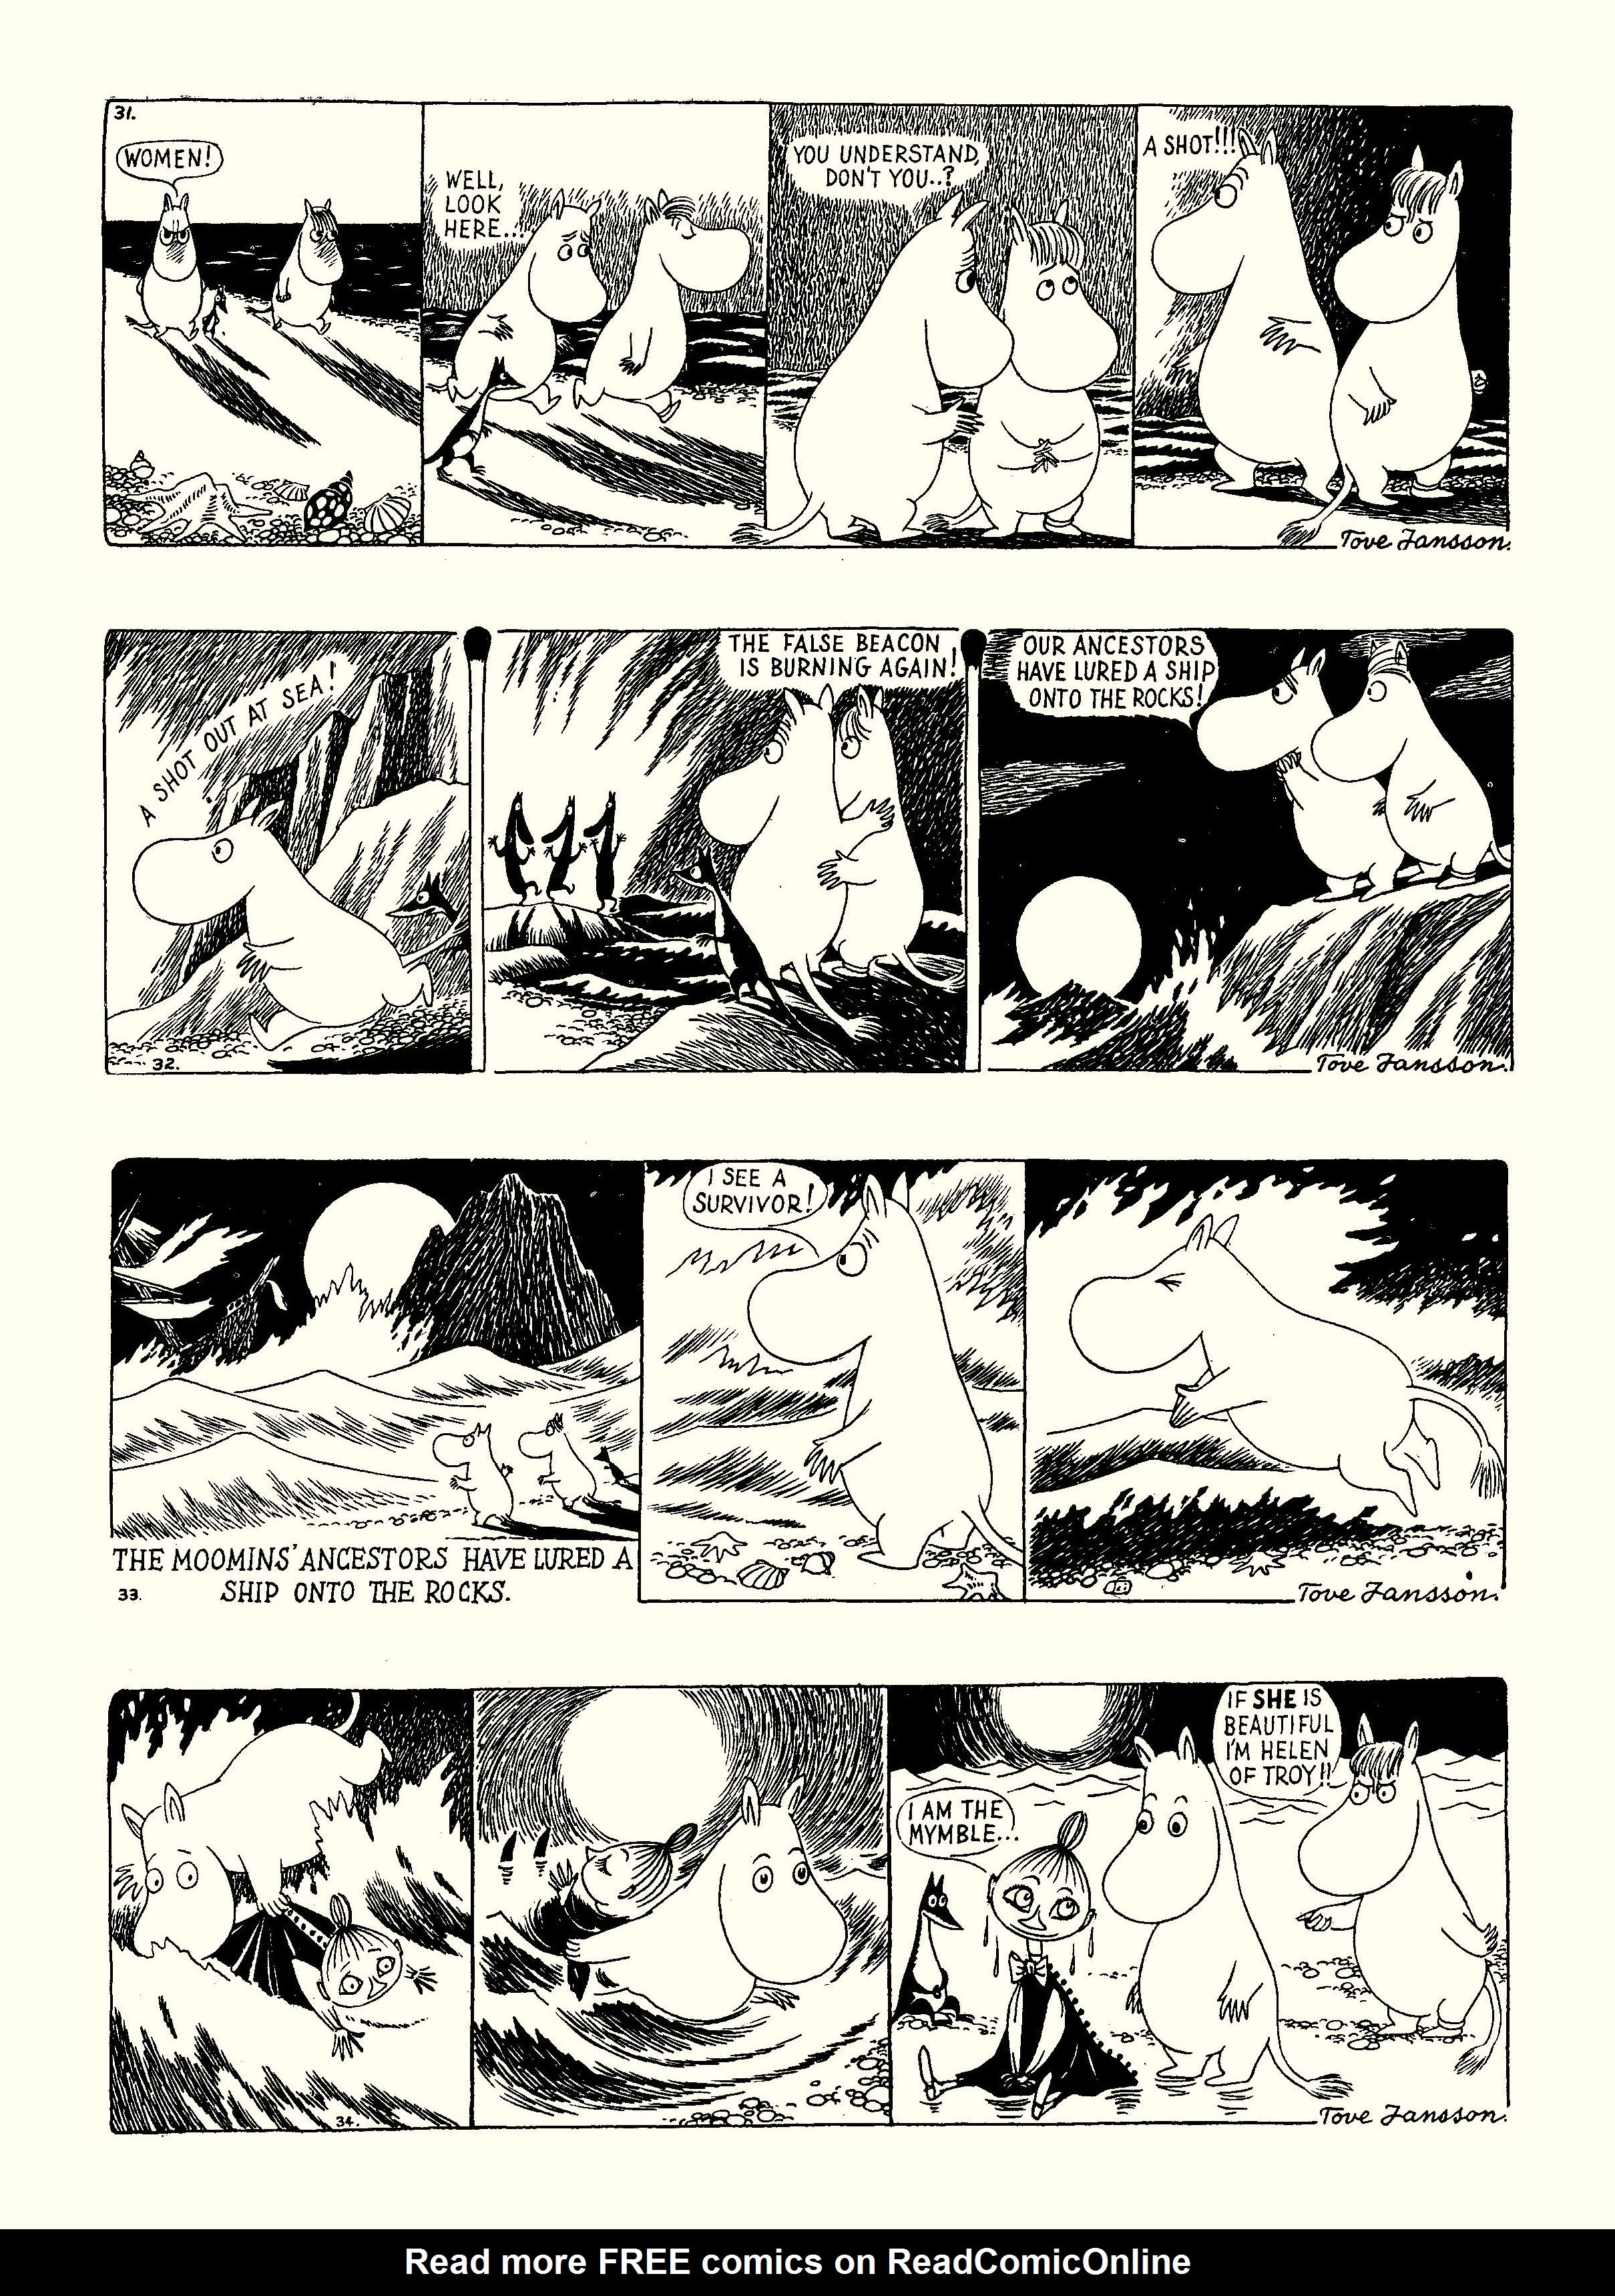 Read online Moomin: The Complete Tove Jansson Comic Strip comic -  Issue # TPB 1 - 78